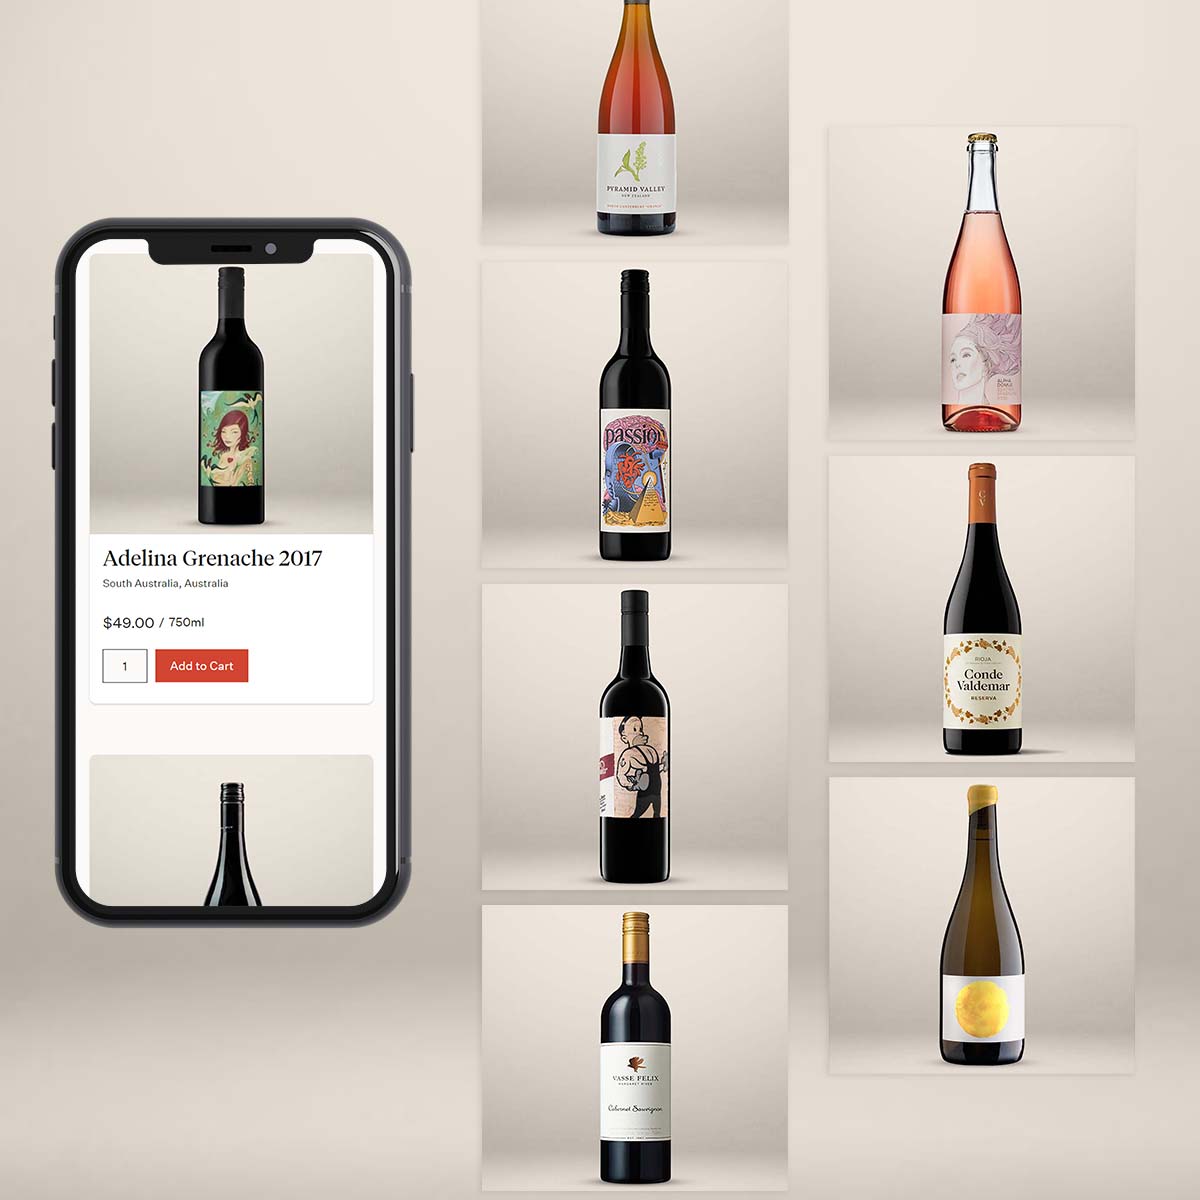 a filmstrip of images showing the art direction for wine bottles sold on 495 Wine Select